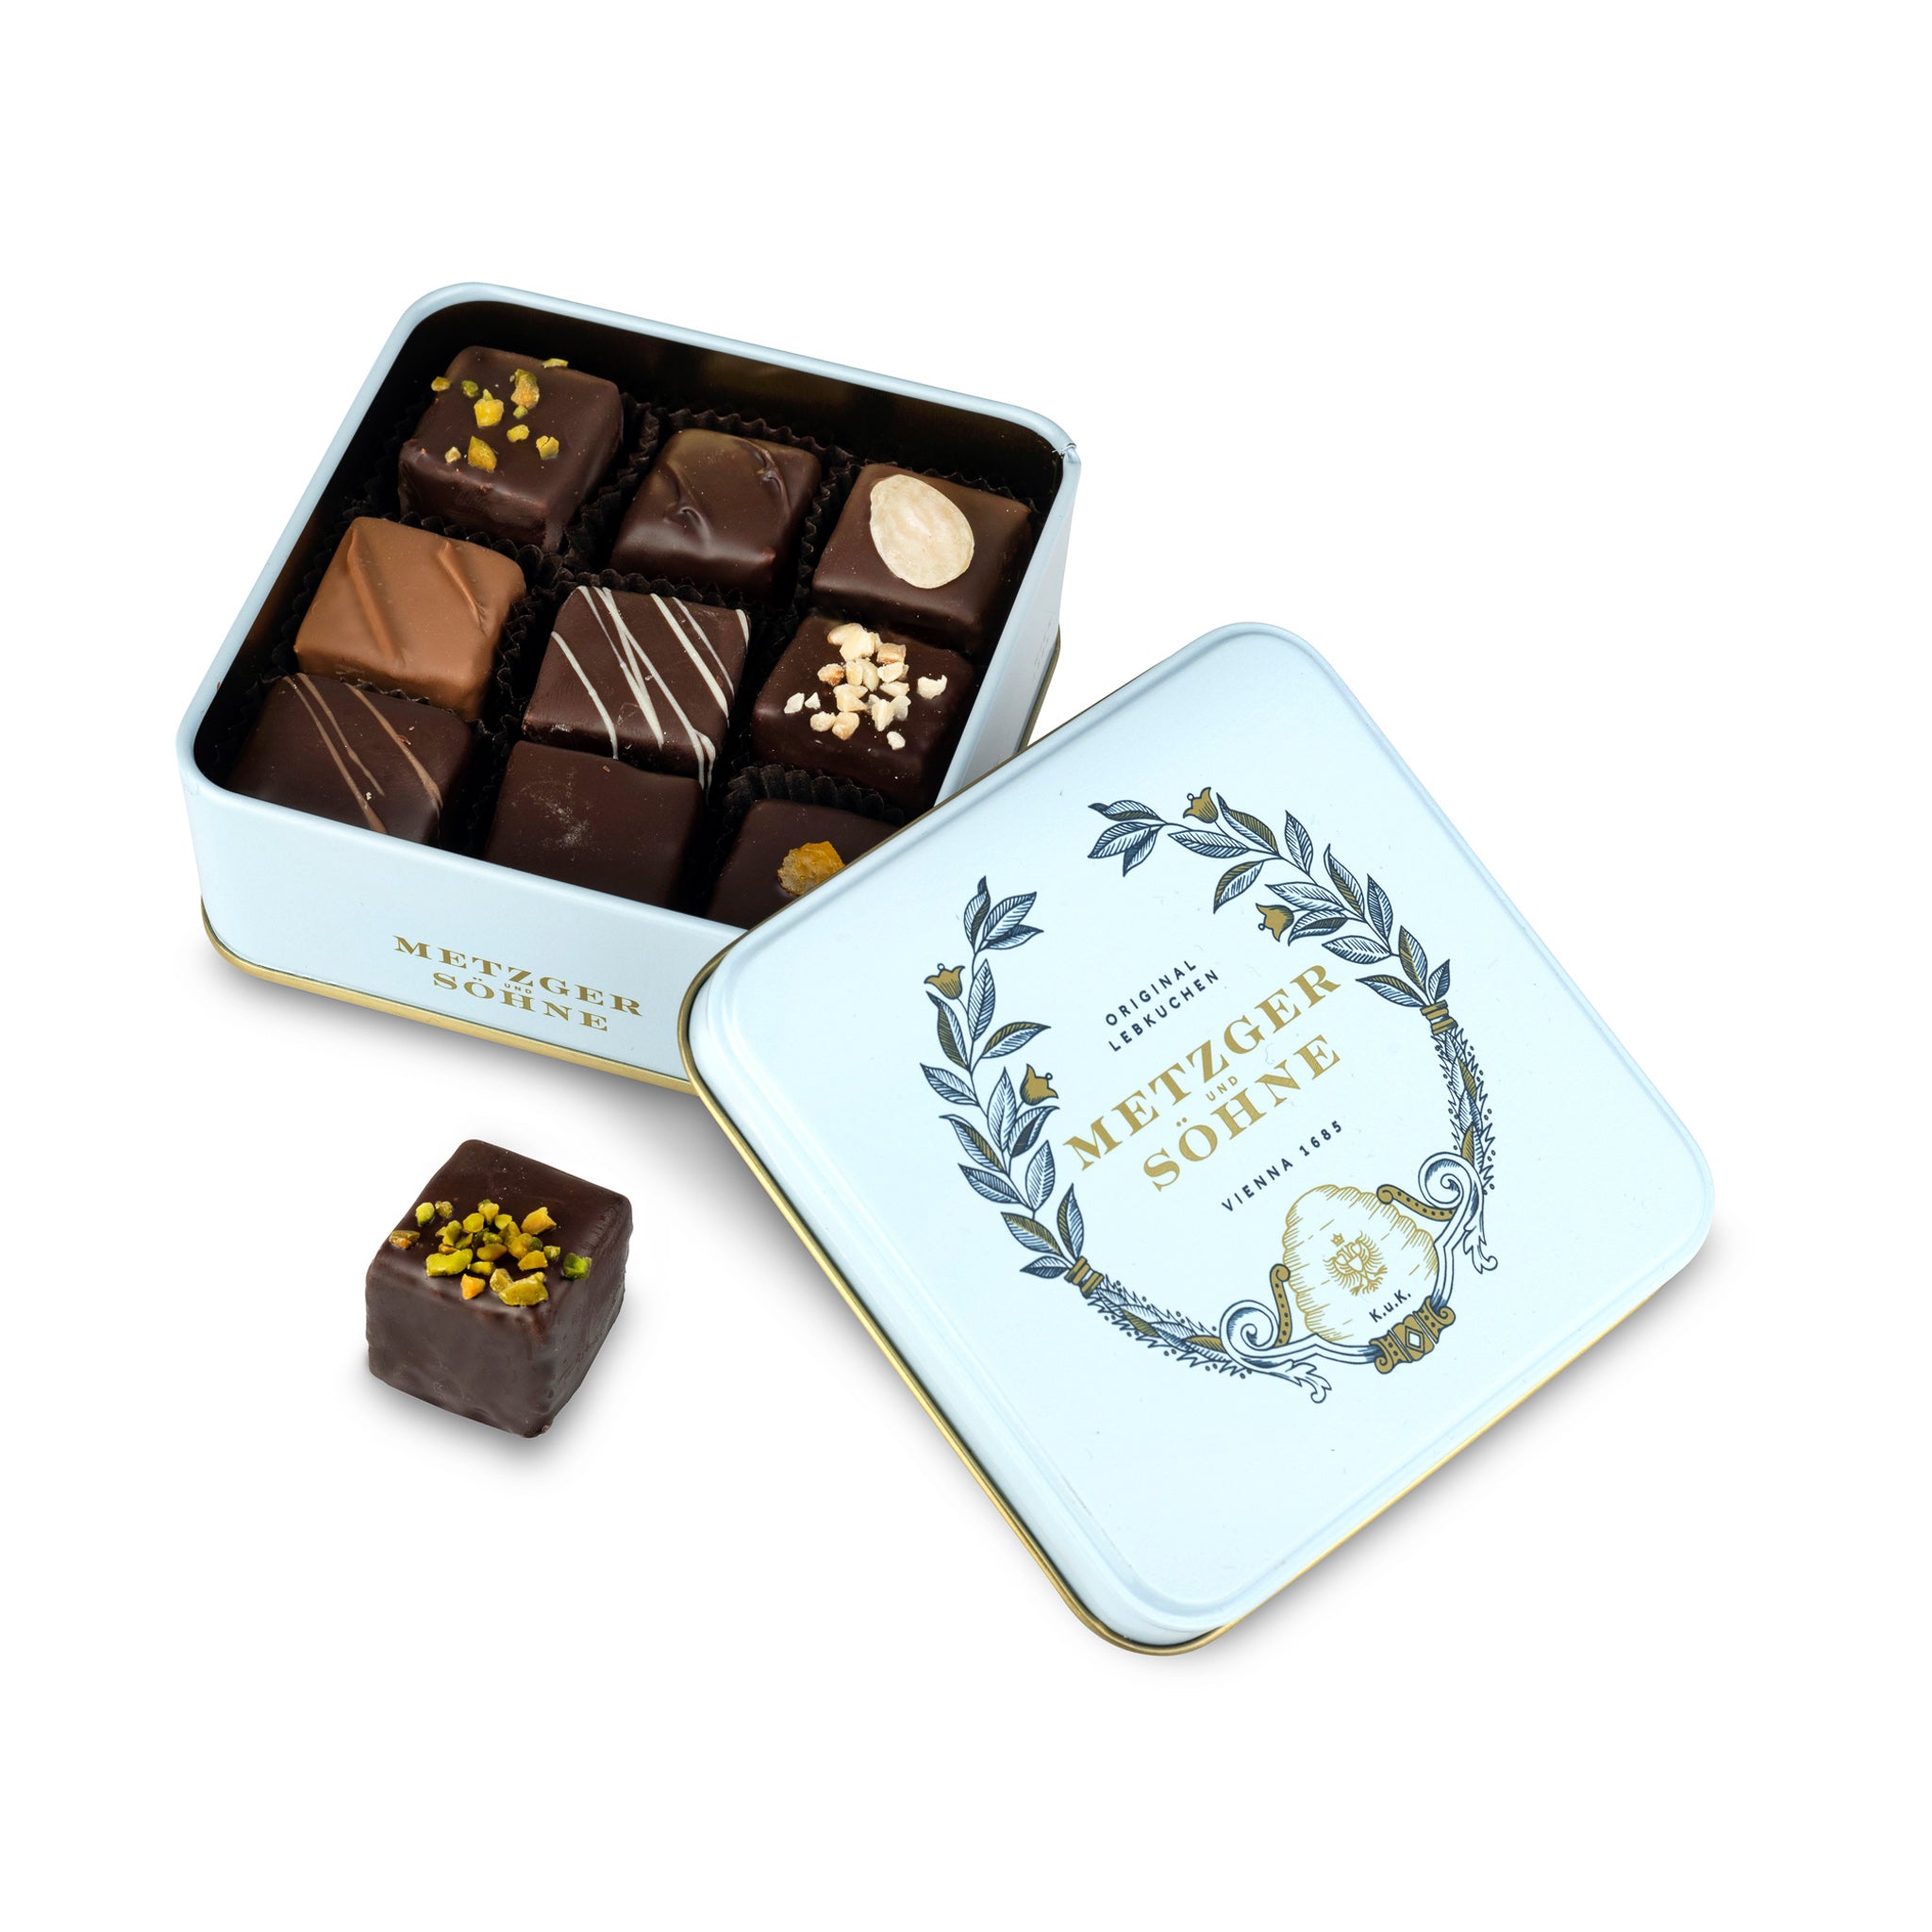 A perfect gift for a special occasion. Metzger's signature luxury tin in ice blue, filled with with 9 delectable Lebkuchen chocolate pralines. Each praline is layered with Lebkuchen 'honey cake' and filled with marzipan, nuts or fruit jams and jellies, encased in rich chocolate. Suitable for vegetarians.